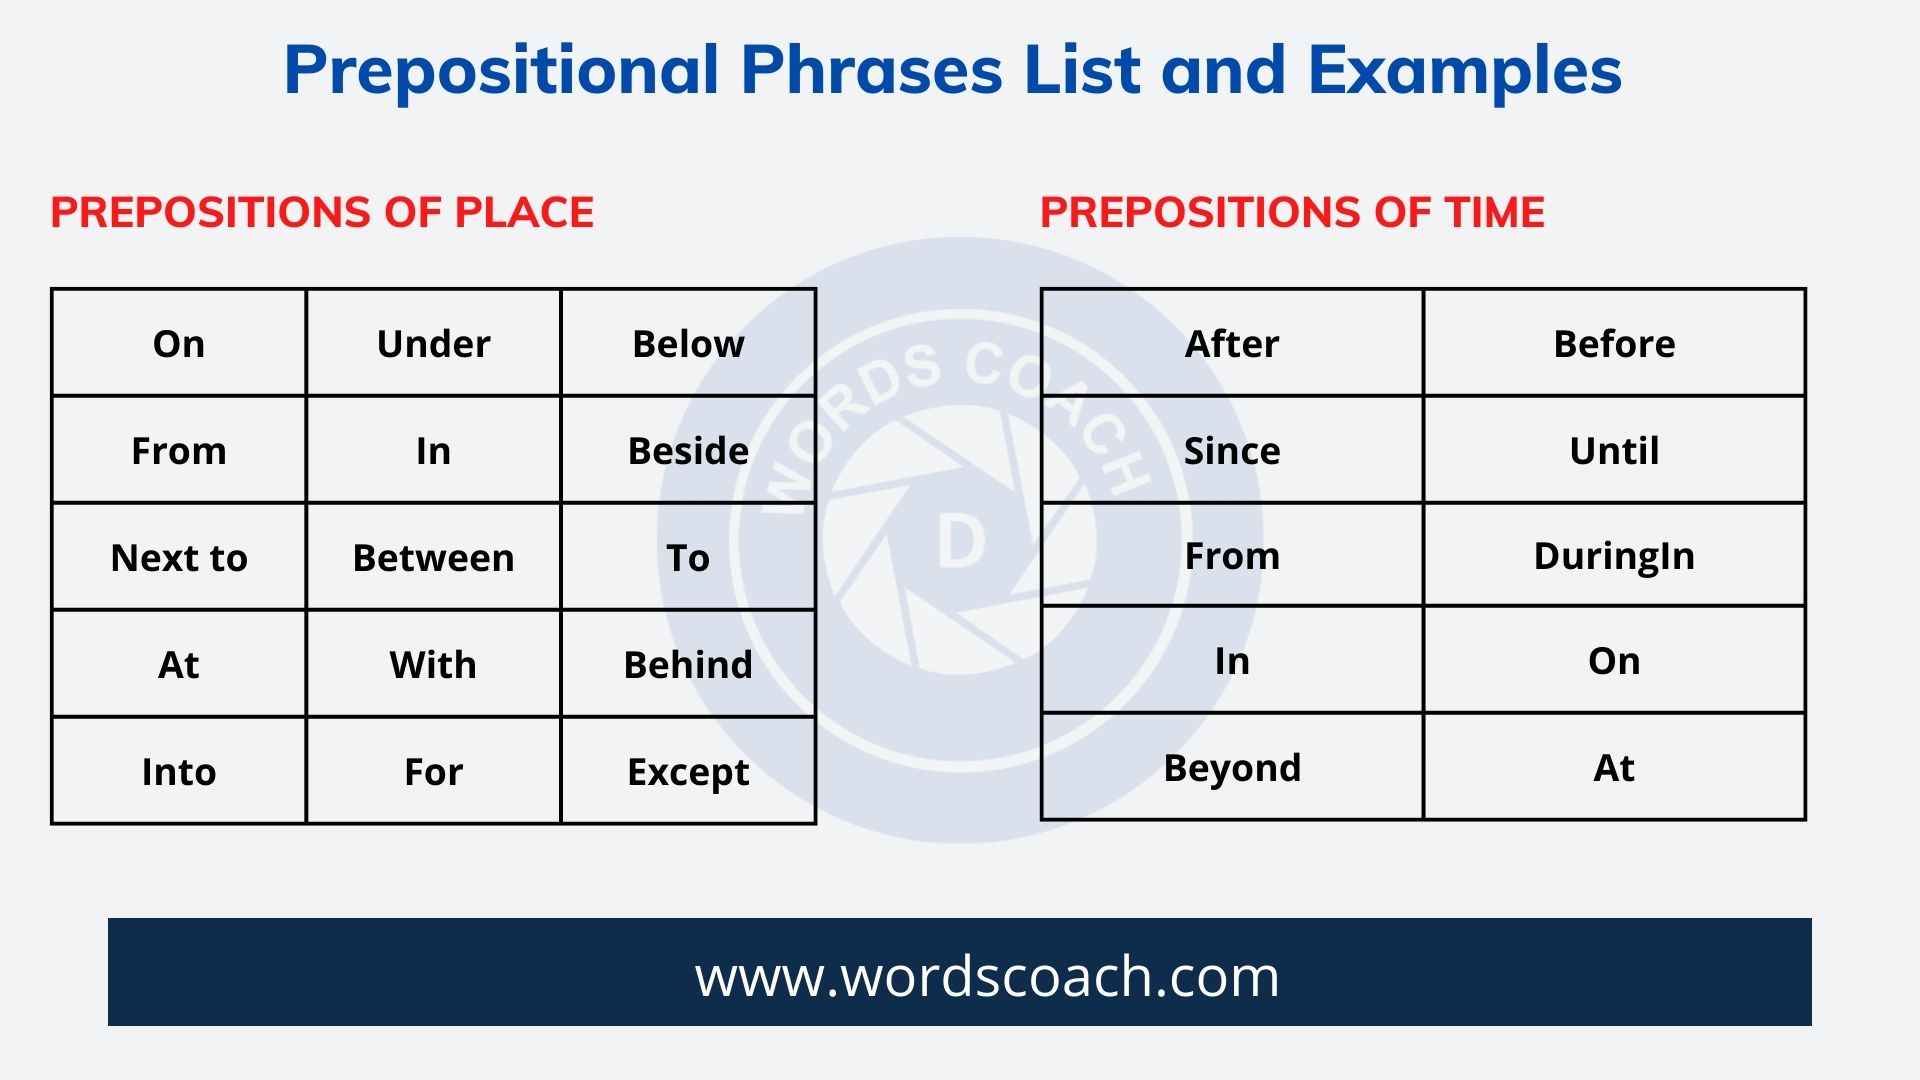 Prepositional Phrases List and Examples